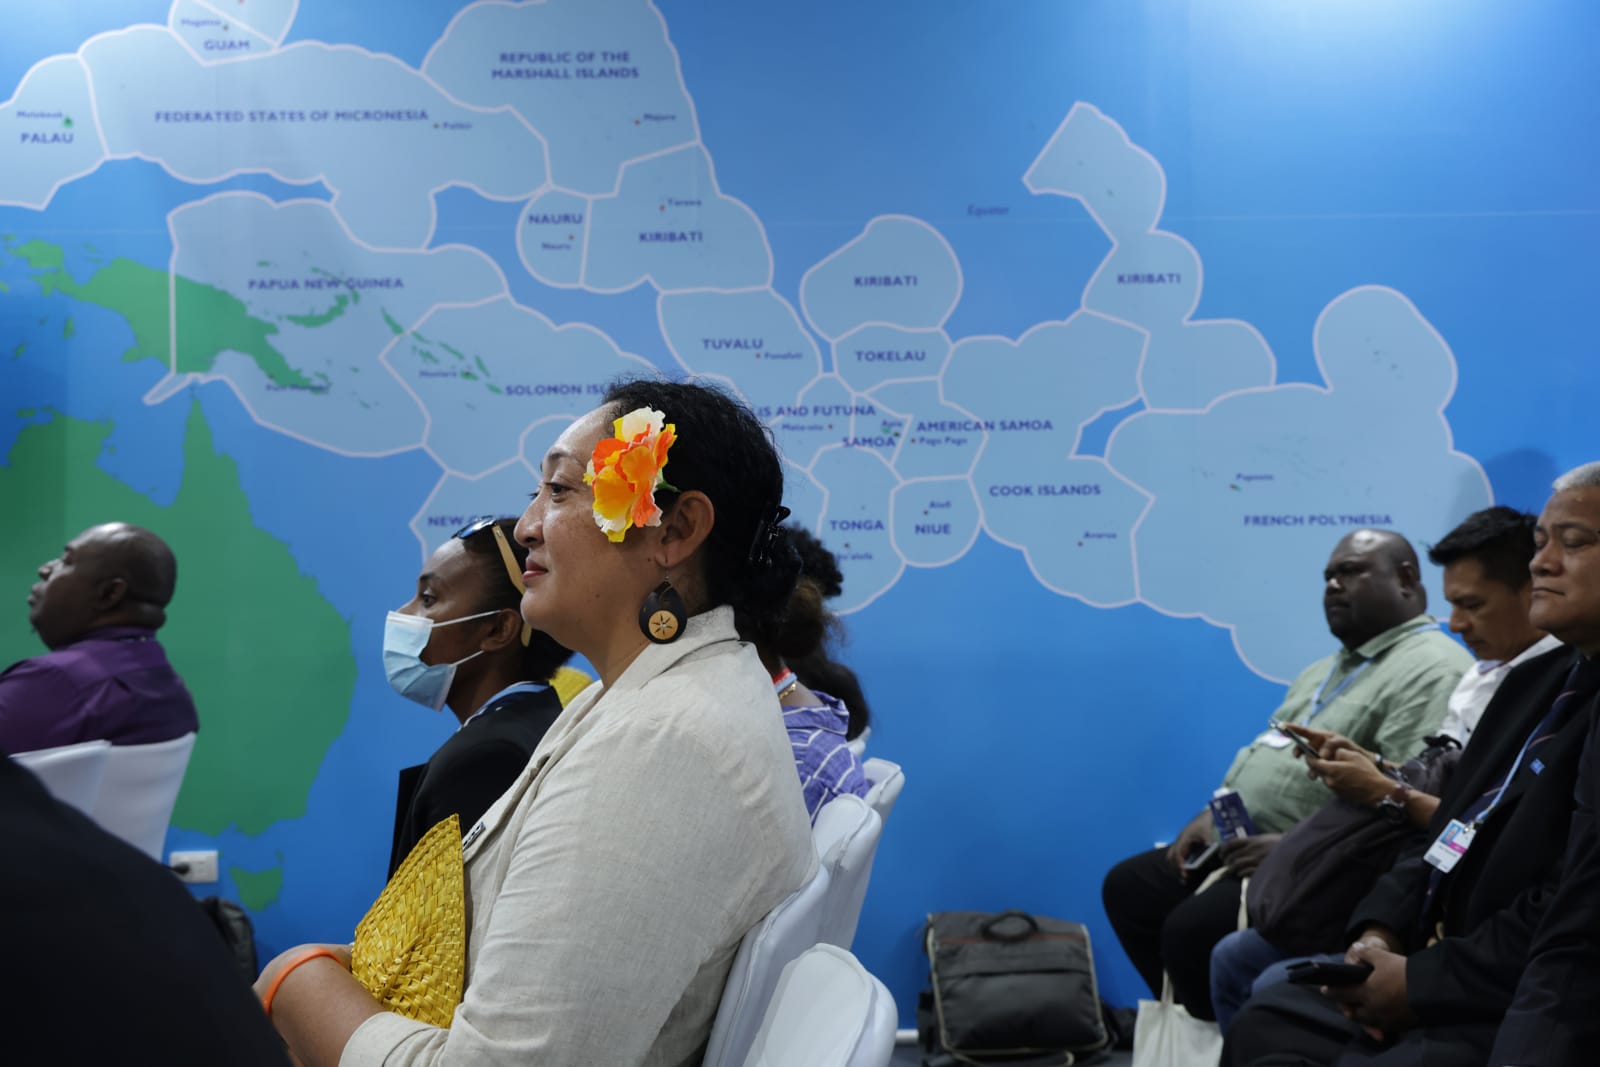 Participants attend a panel discussion at a pavilion representing island nations of the Pacific Ocean at the 2022 COP27 climate conference in Sharm El Sheikh, Egypt (Sean Gallup/Getty Images)